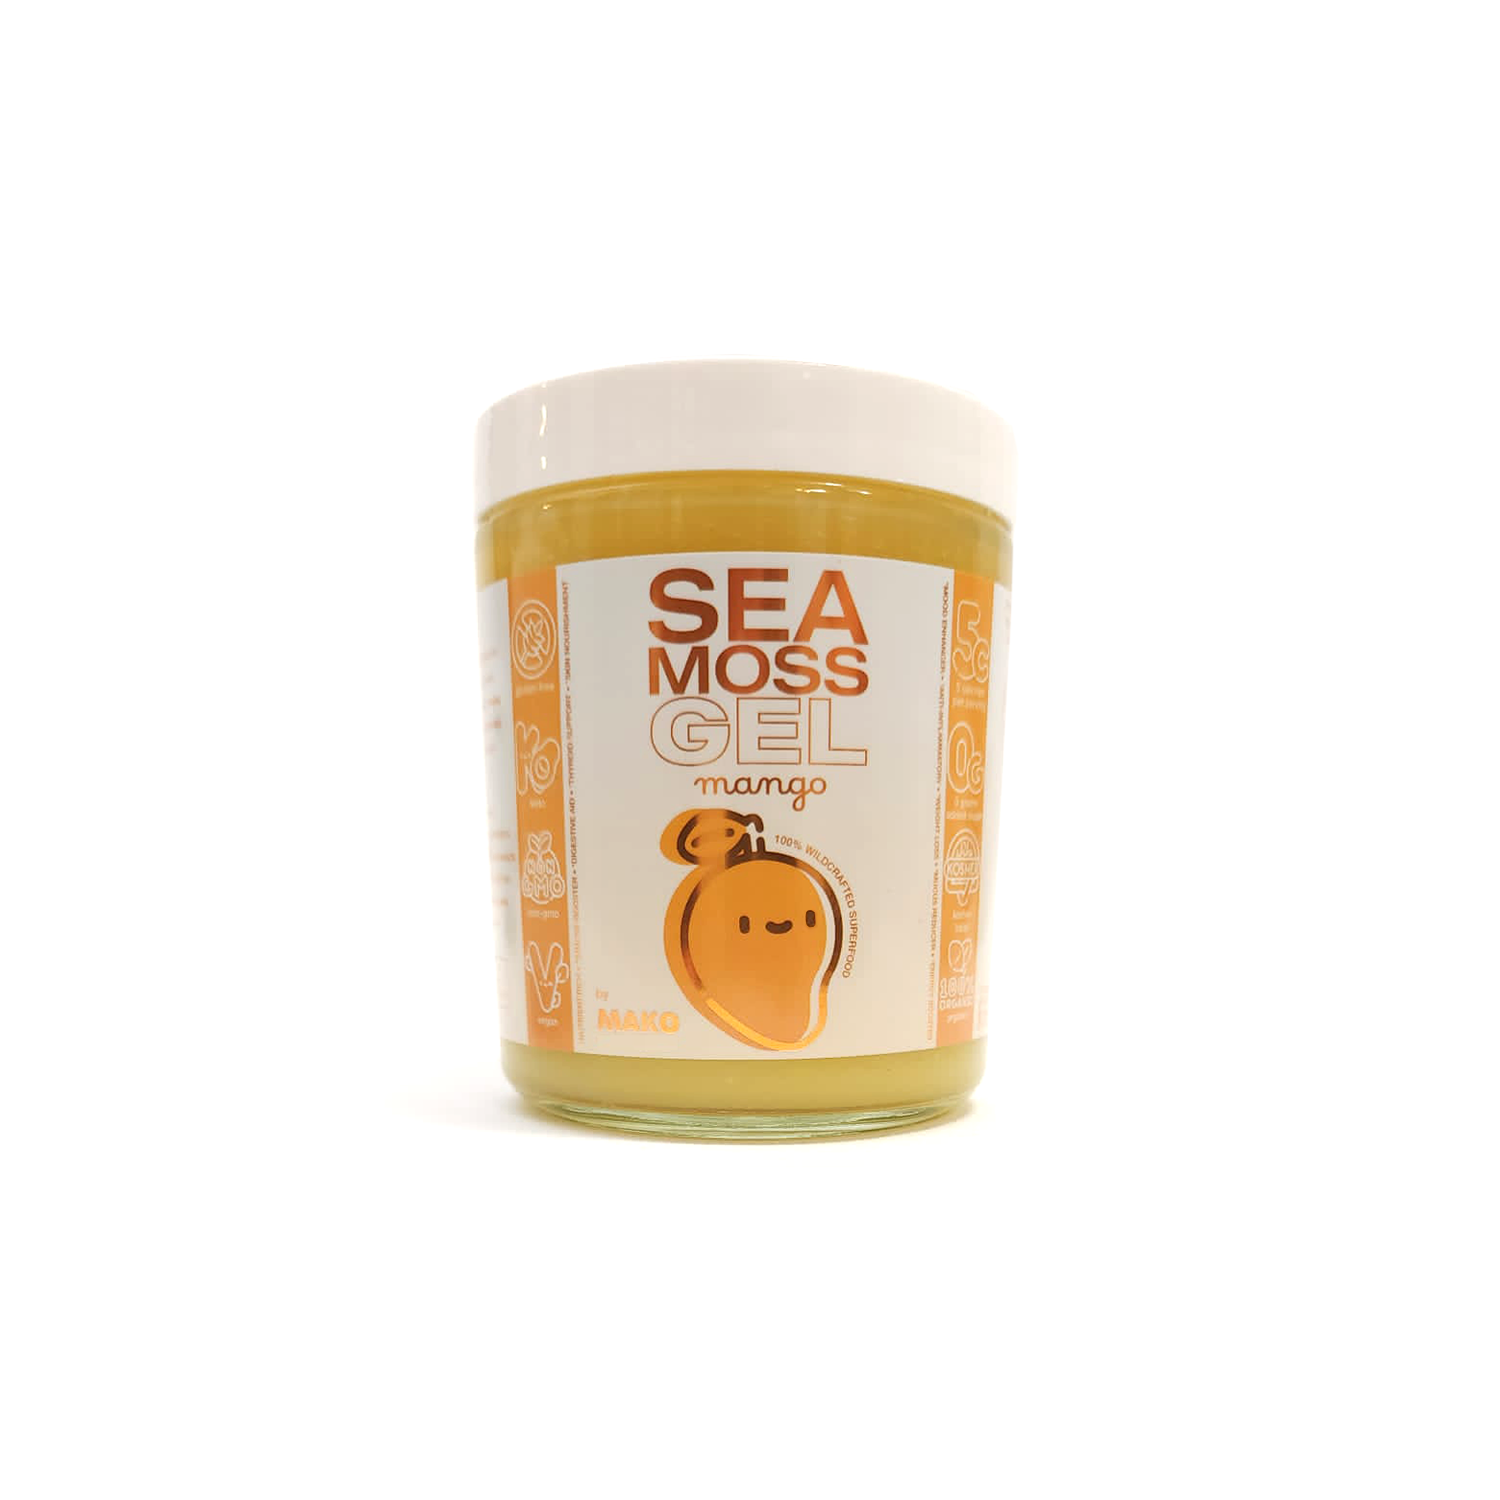 Wildcrafted Raw Sea Moss, Free Shipping